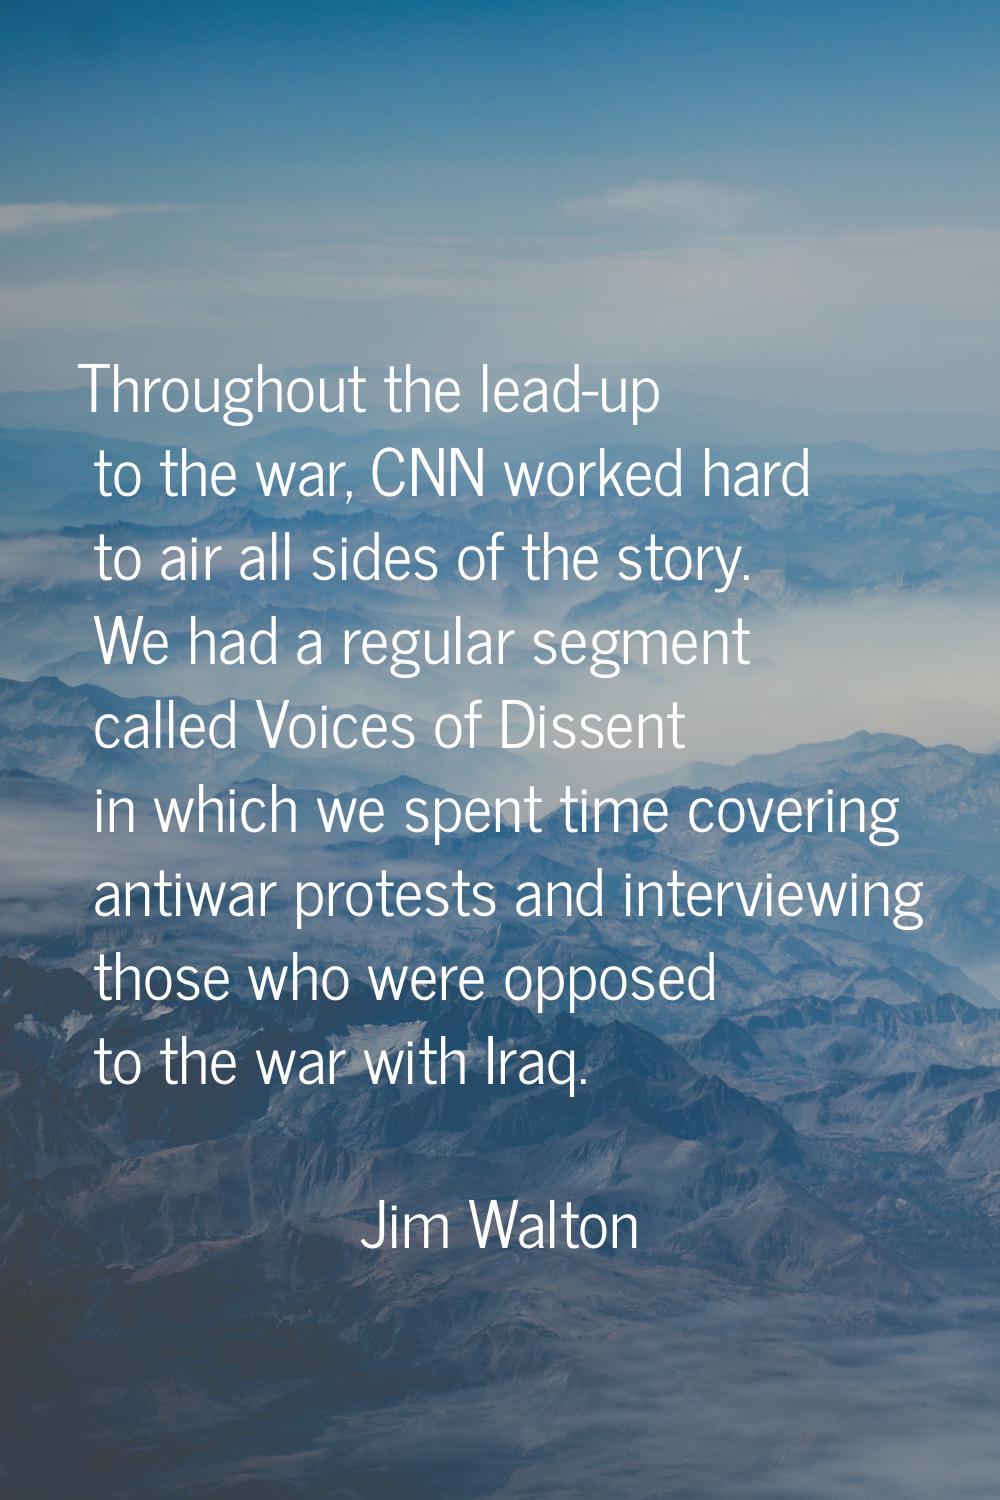 Throughout the lead-up to the war, CNN worked hard to air all sides of the story. We had a regular 